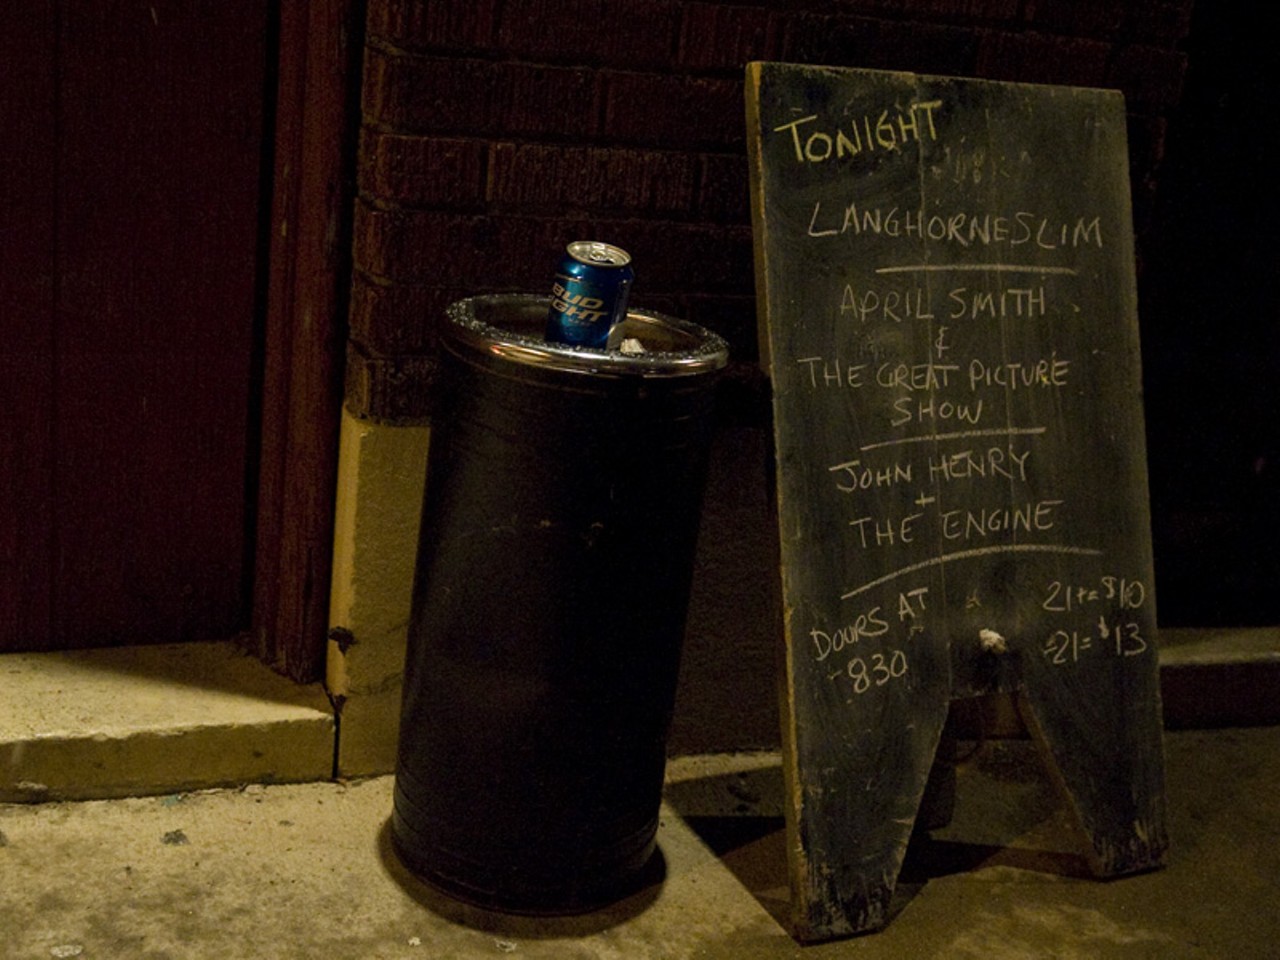 The line-up is written on a chalkboard outside Off Broadway, which is at 3511 Lemp Avenue.